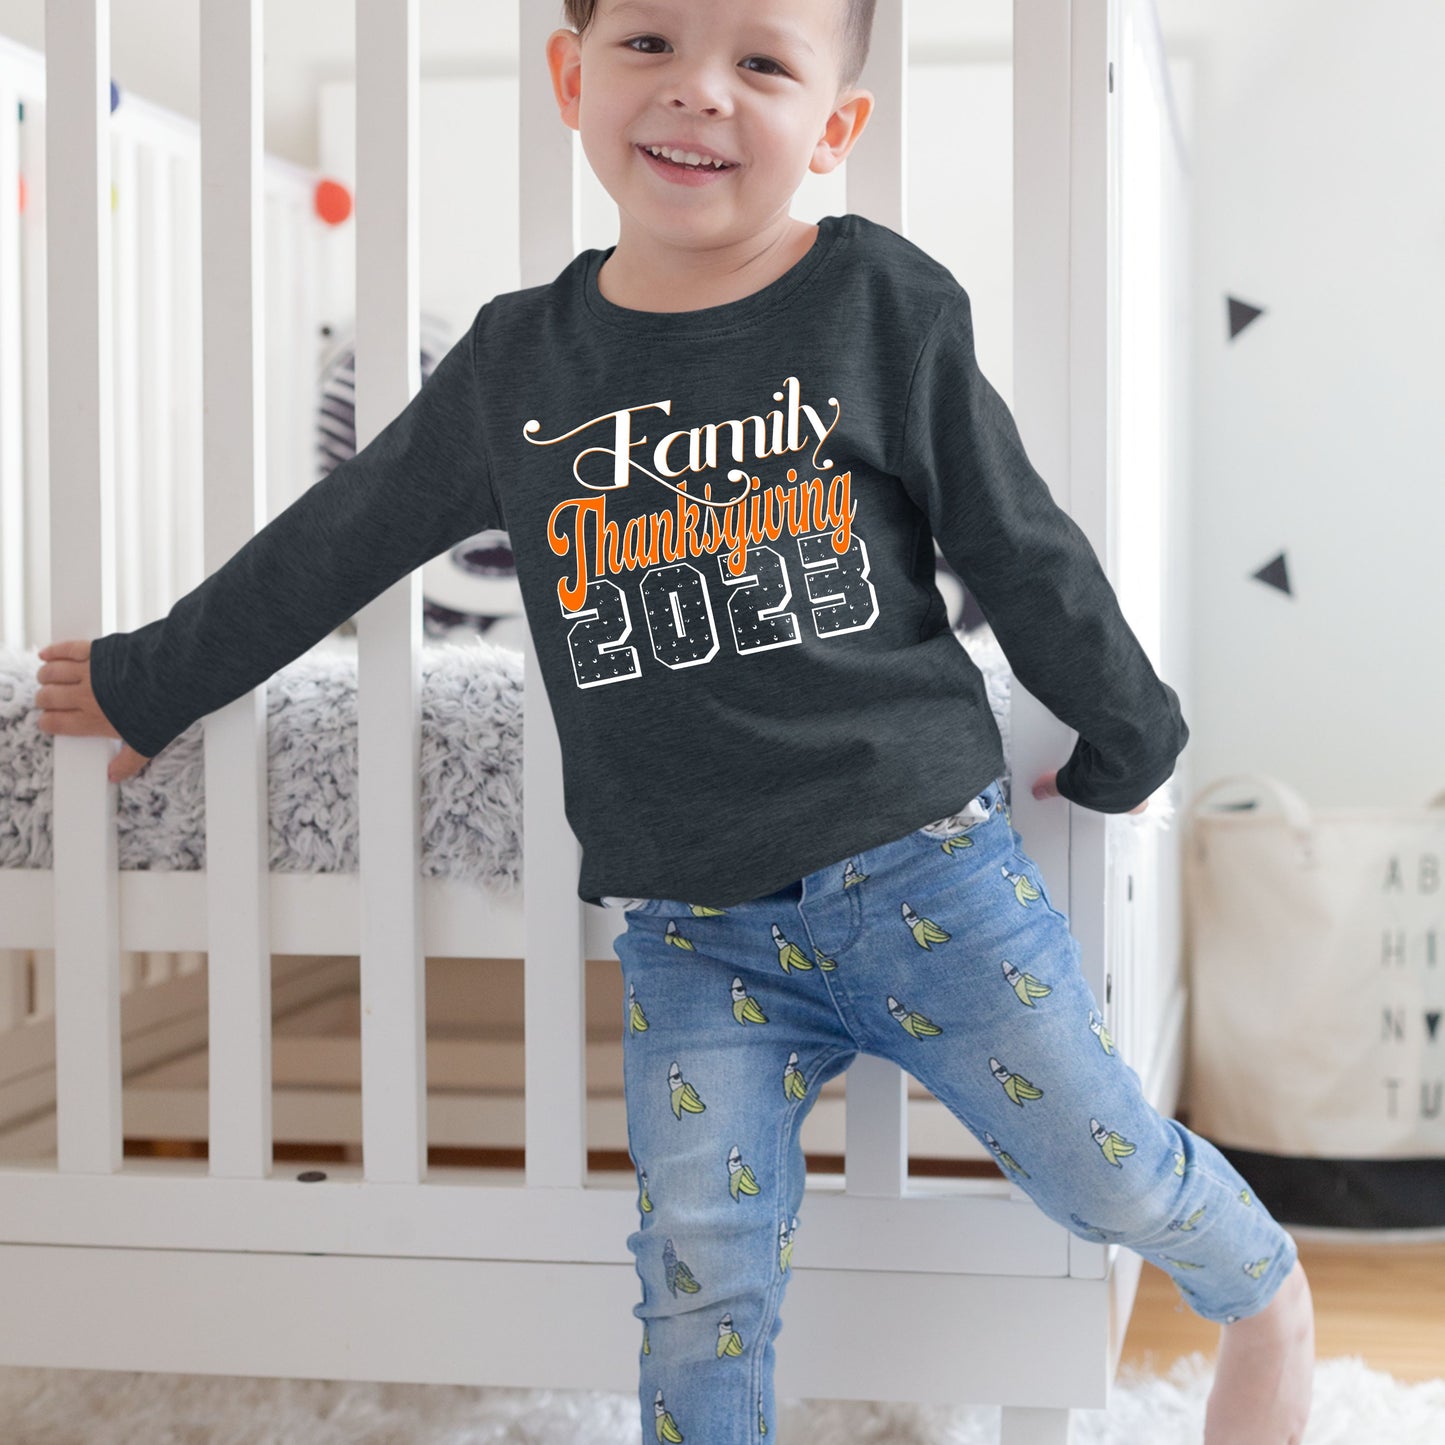 Thanksgiving Family 2023, Thanksgiving Sweater for kids, Thanksgiving Sweatshirt, Thanksgiving Gift Ideas, Cute Thanksgiving